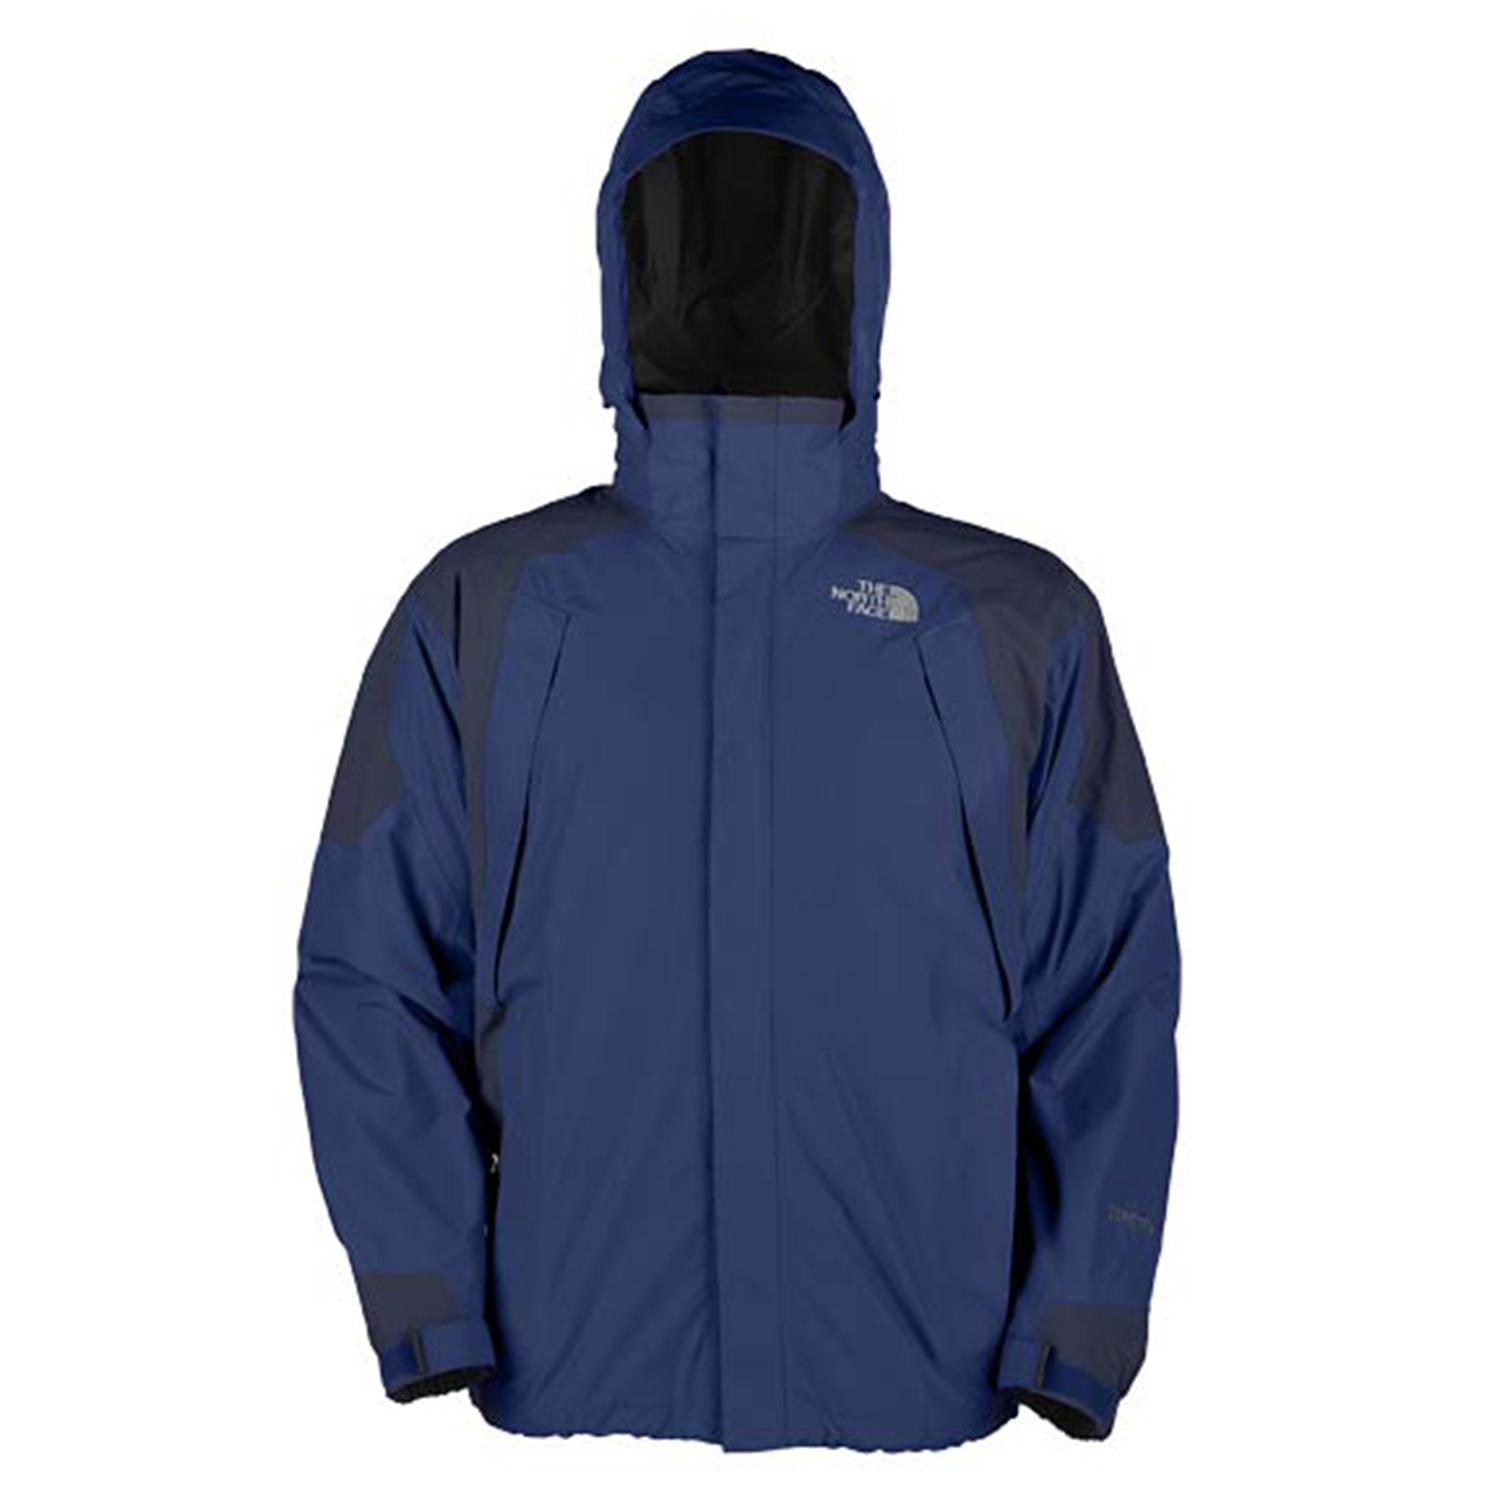 The North Face Mountain Light Gore-Tex Jacket | evo outlet